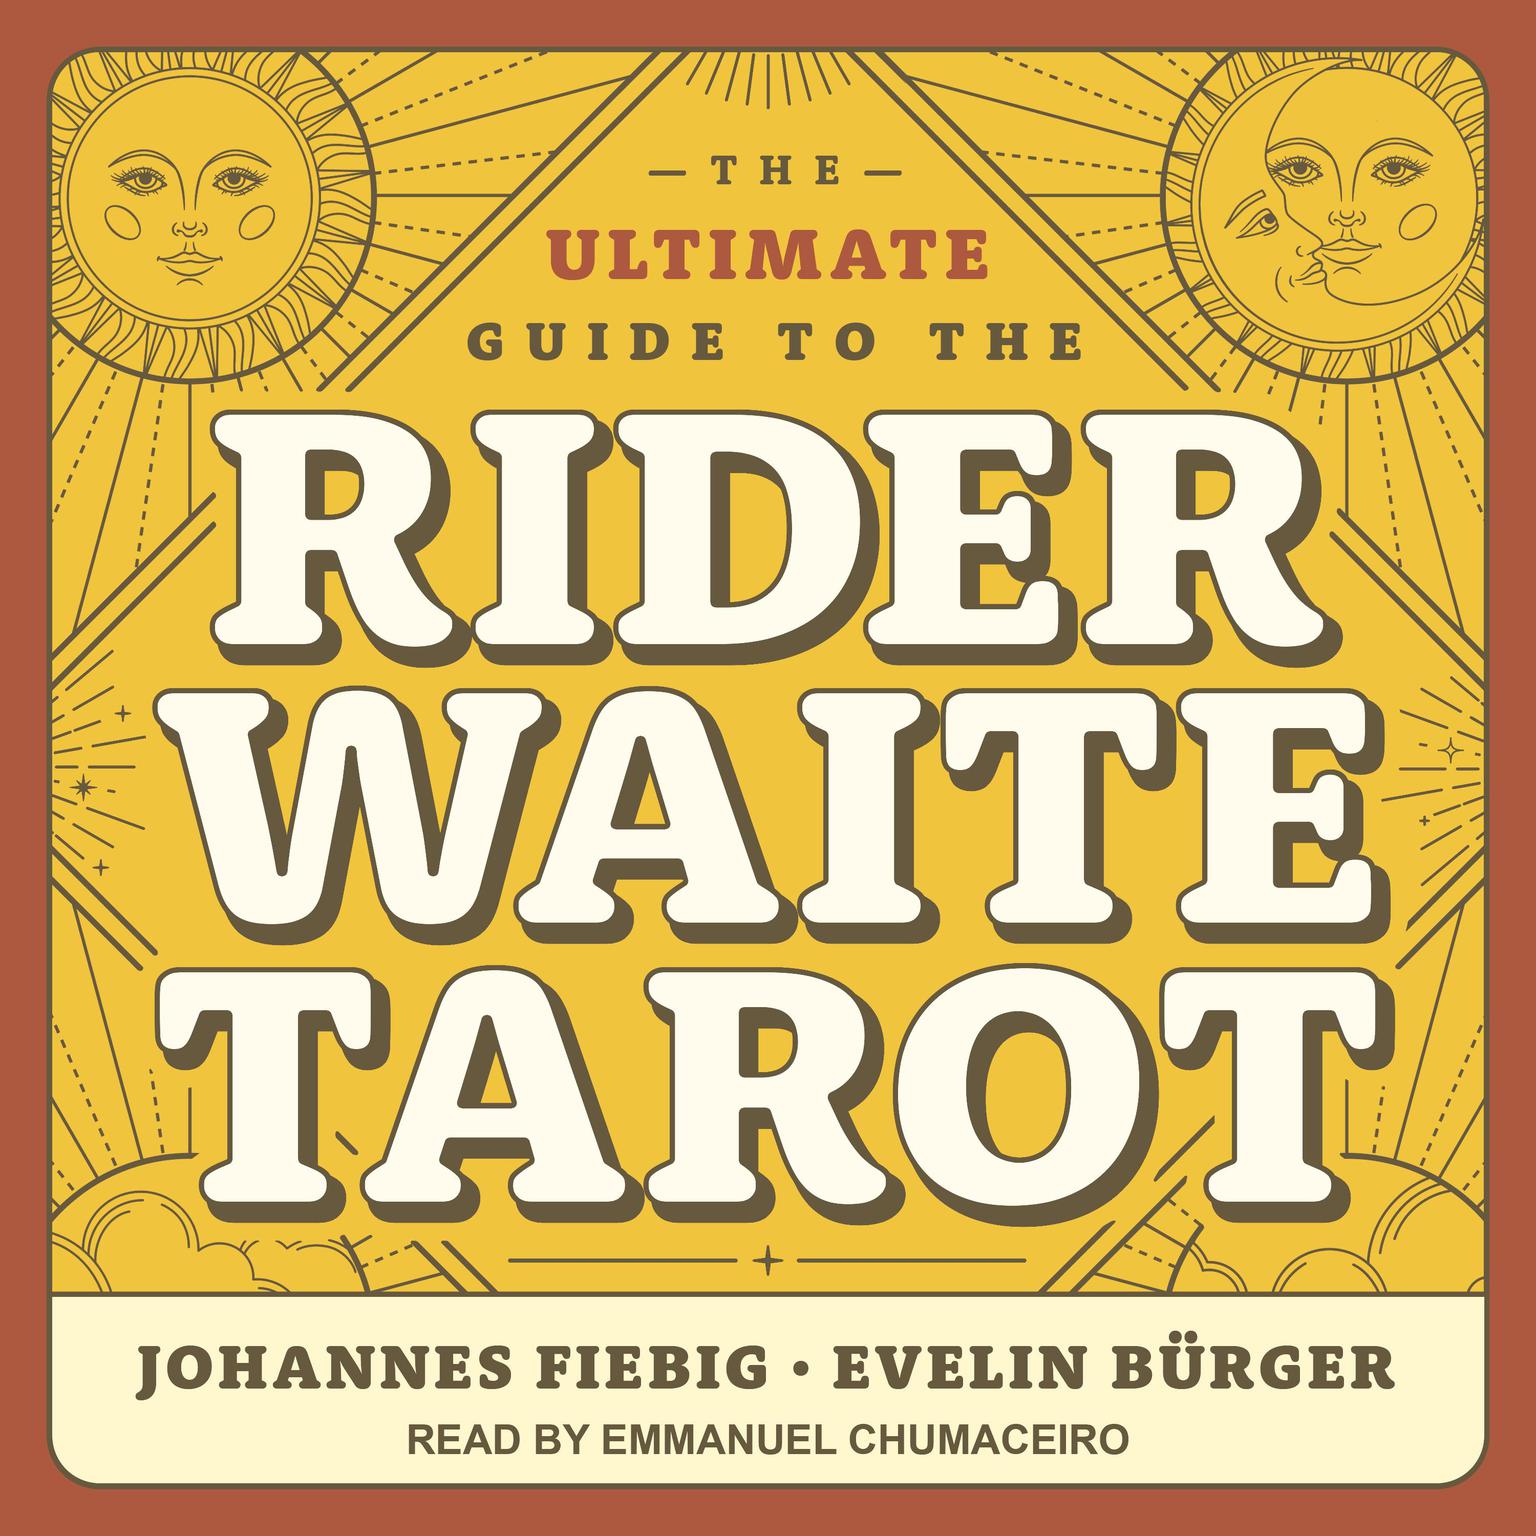 The Ultimate Guide to the Rider Waite Tarot Audiobook, by Johannes Fiebig